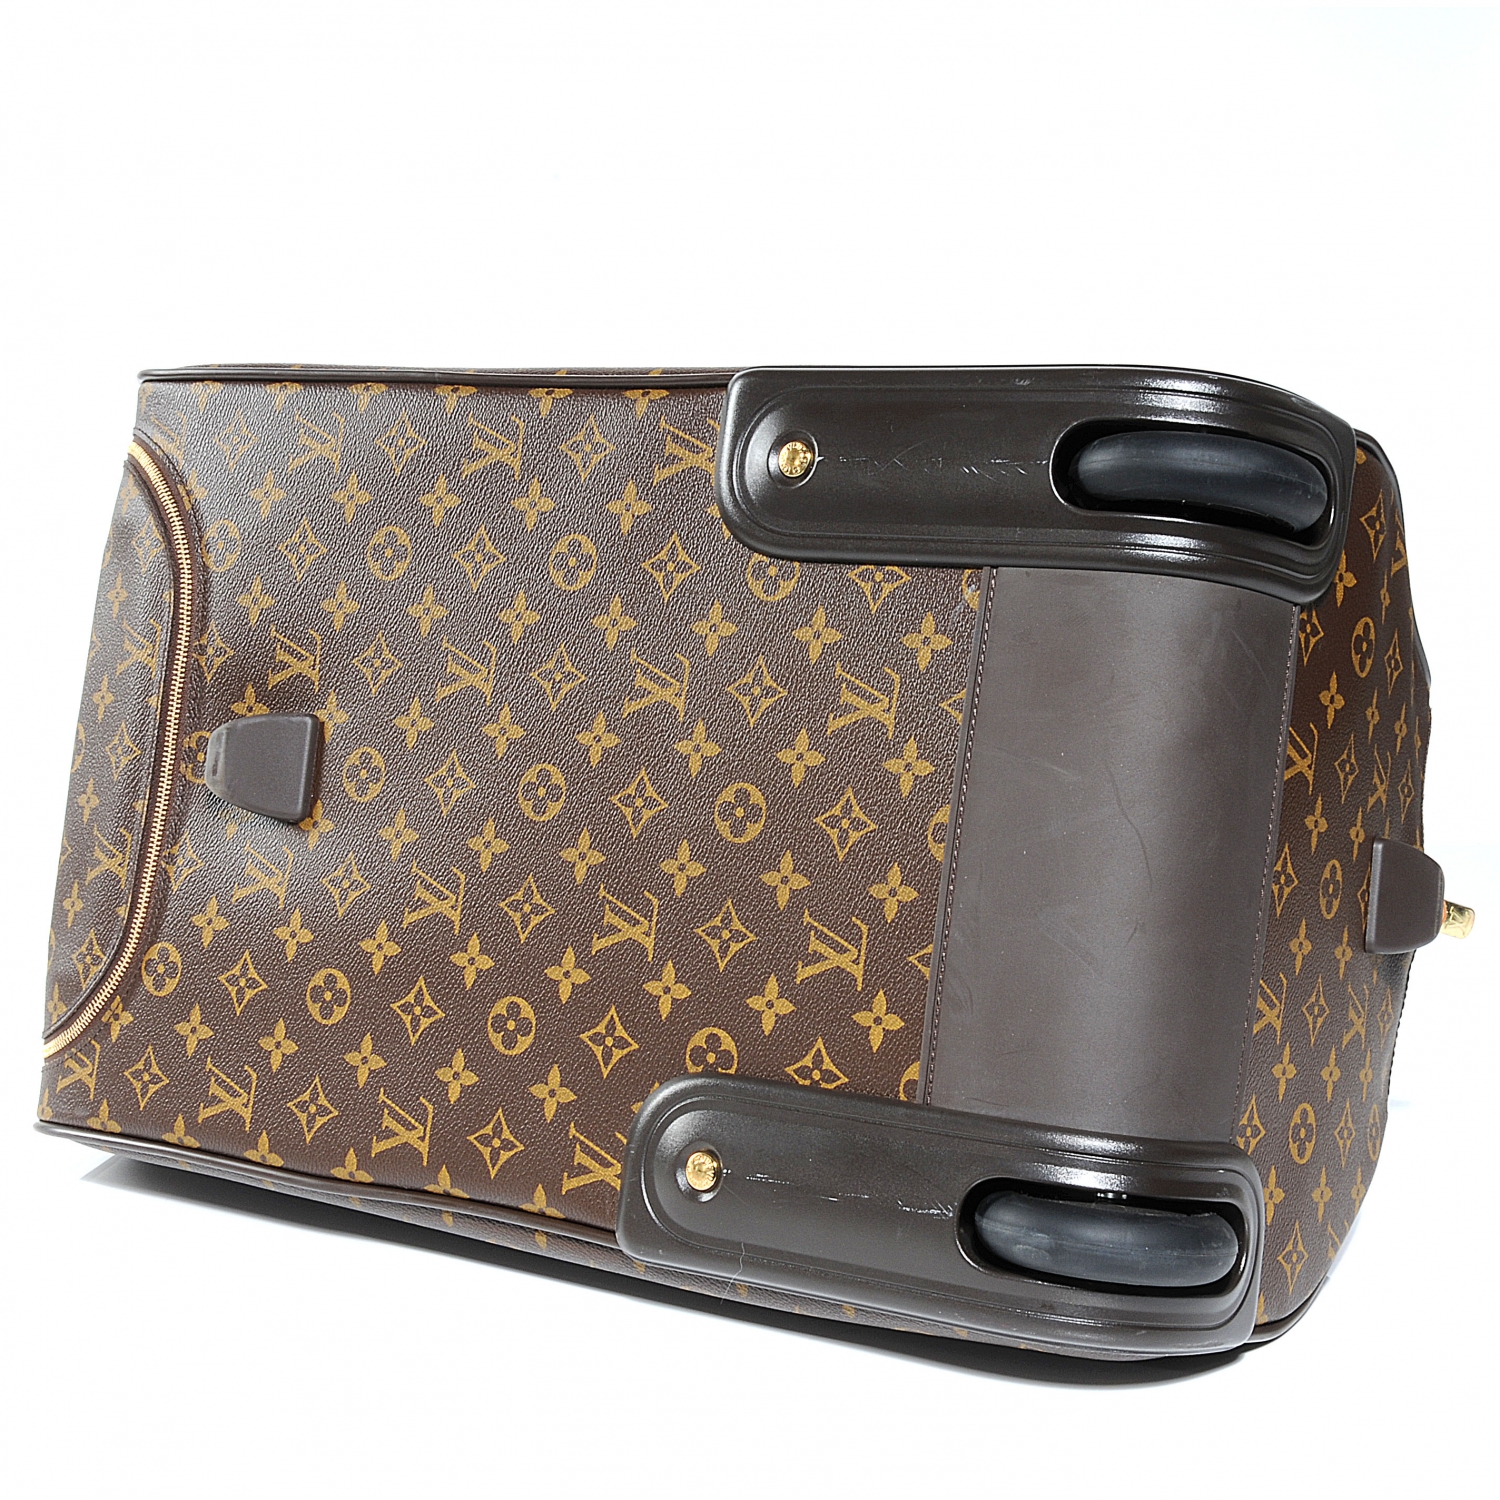 LOUIS VUITTON Monogram Eole 50 Rolling Carry-On Luggage 52240